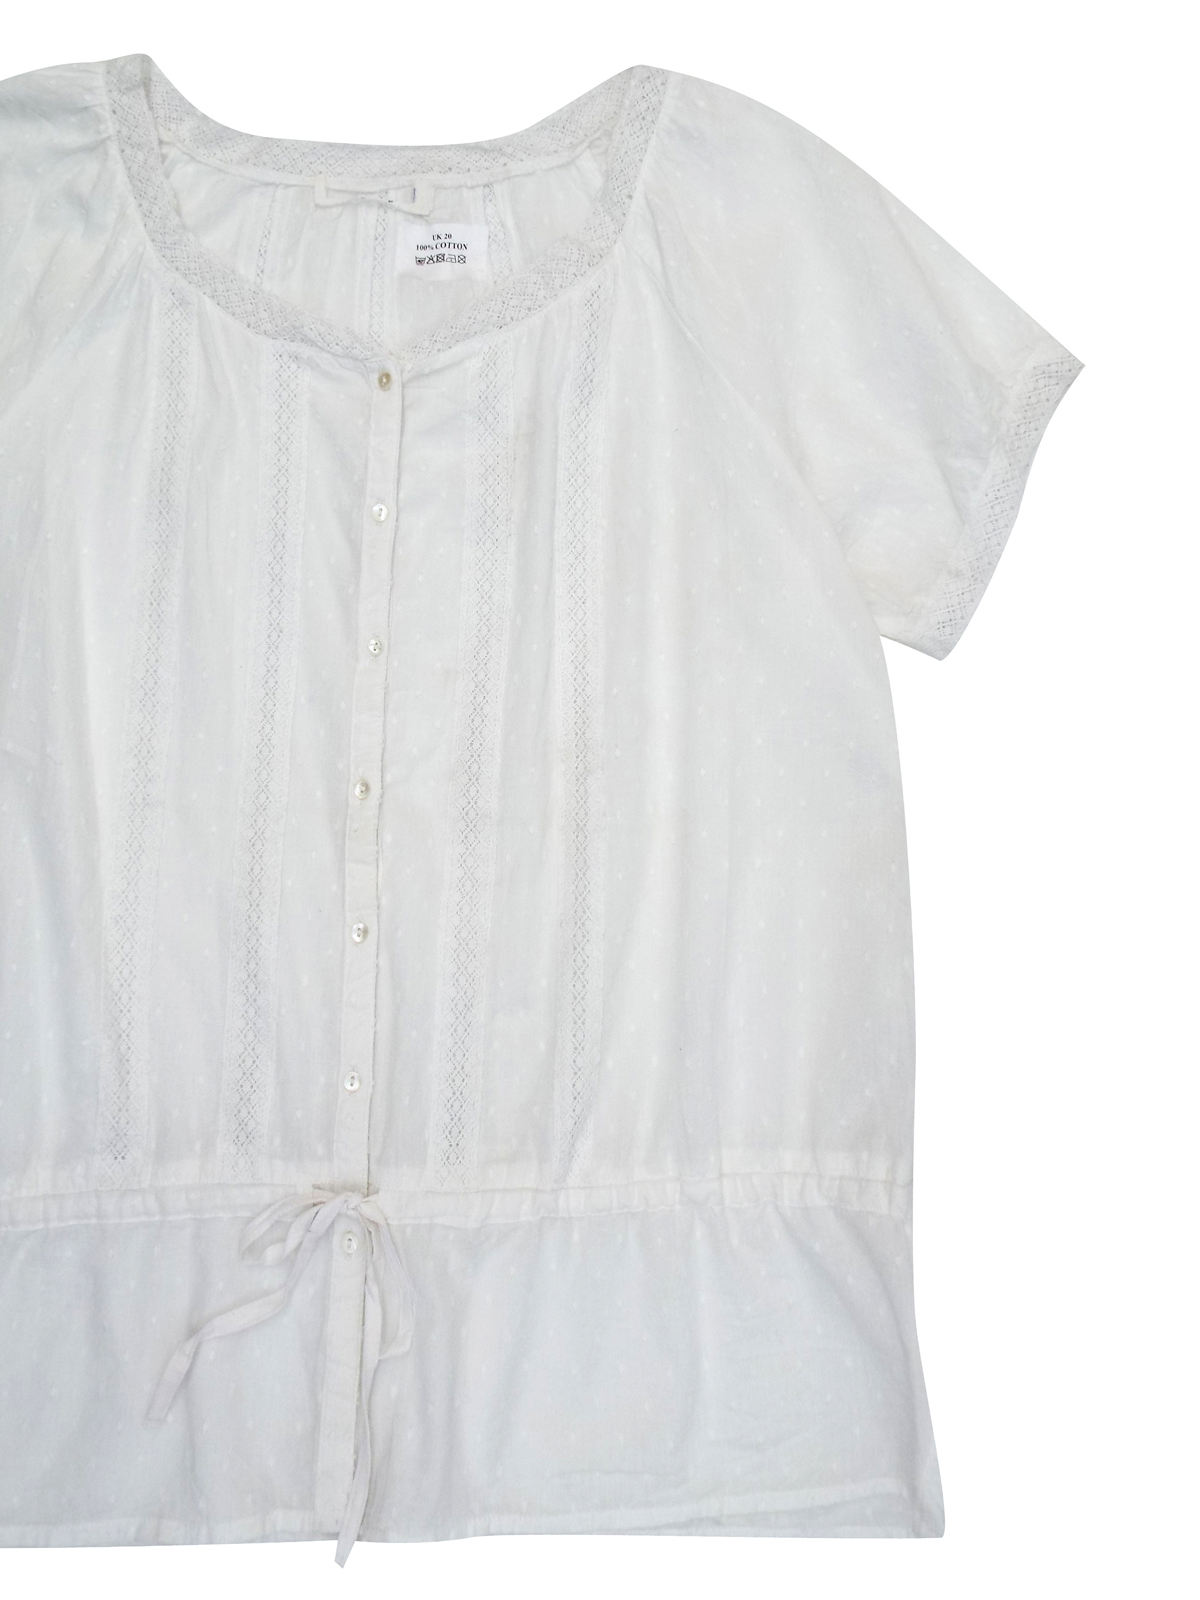 H&M WHITE Pure Cotton Dobby Spotted Gypsy Top - Plus Size 16 to 20 (42 ...